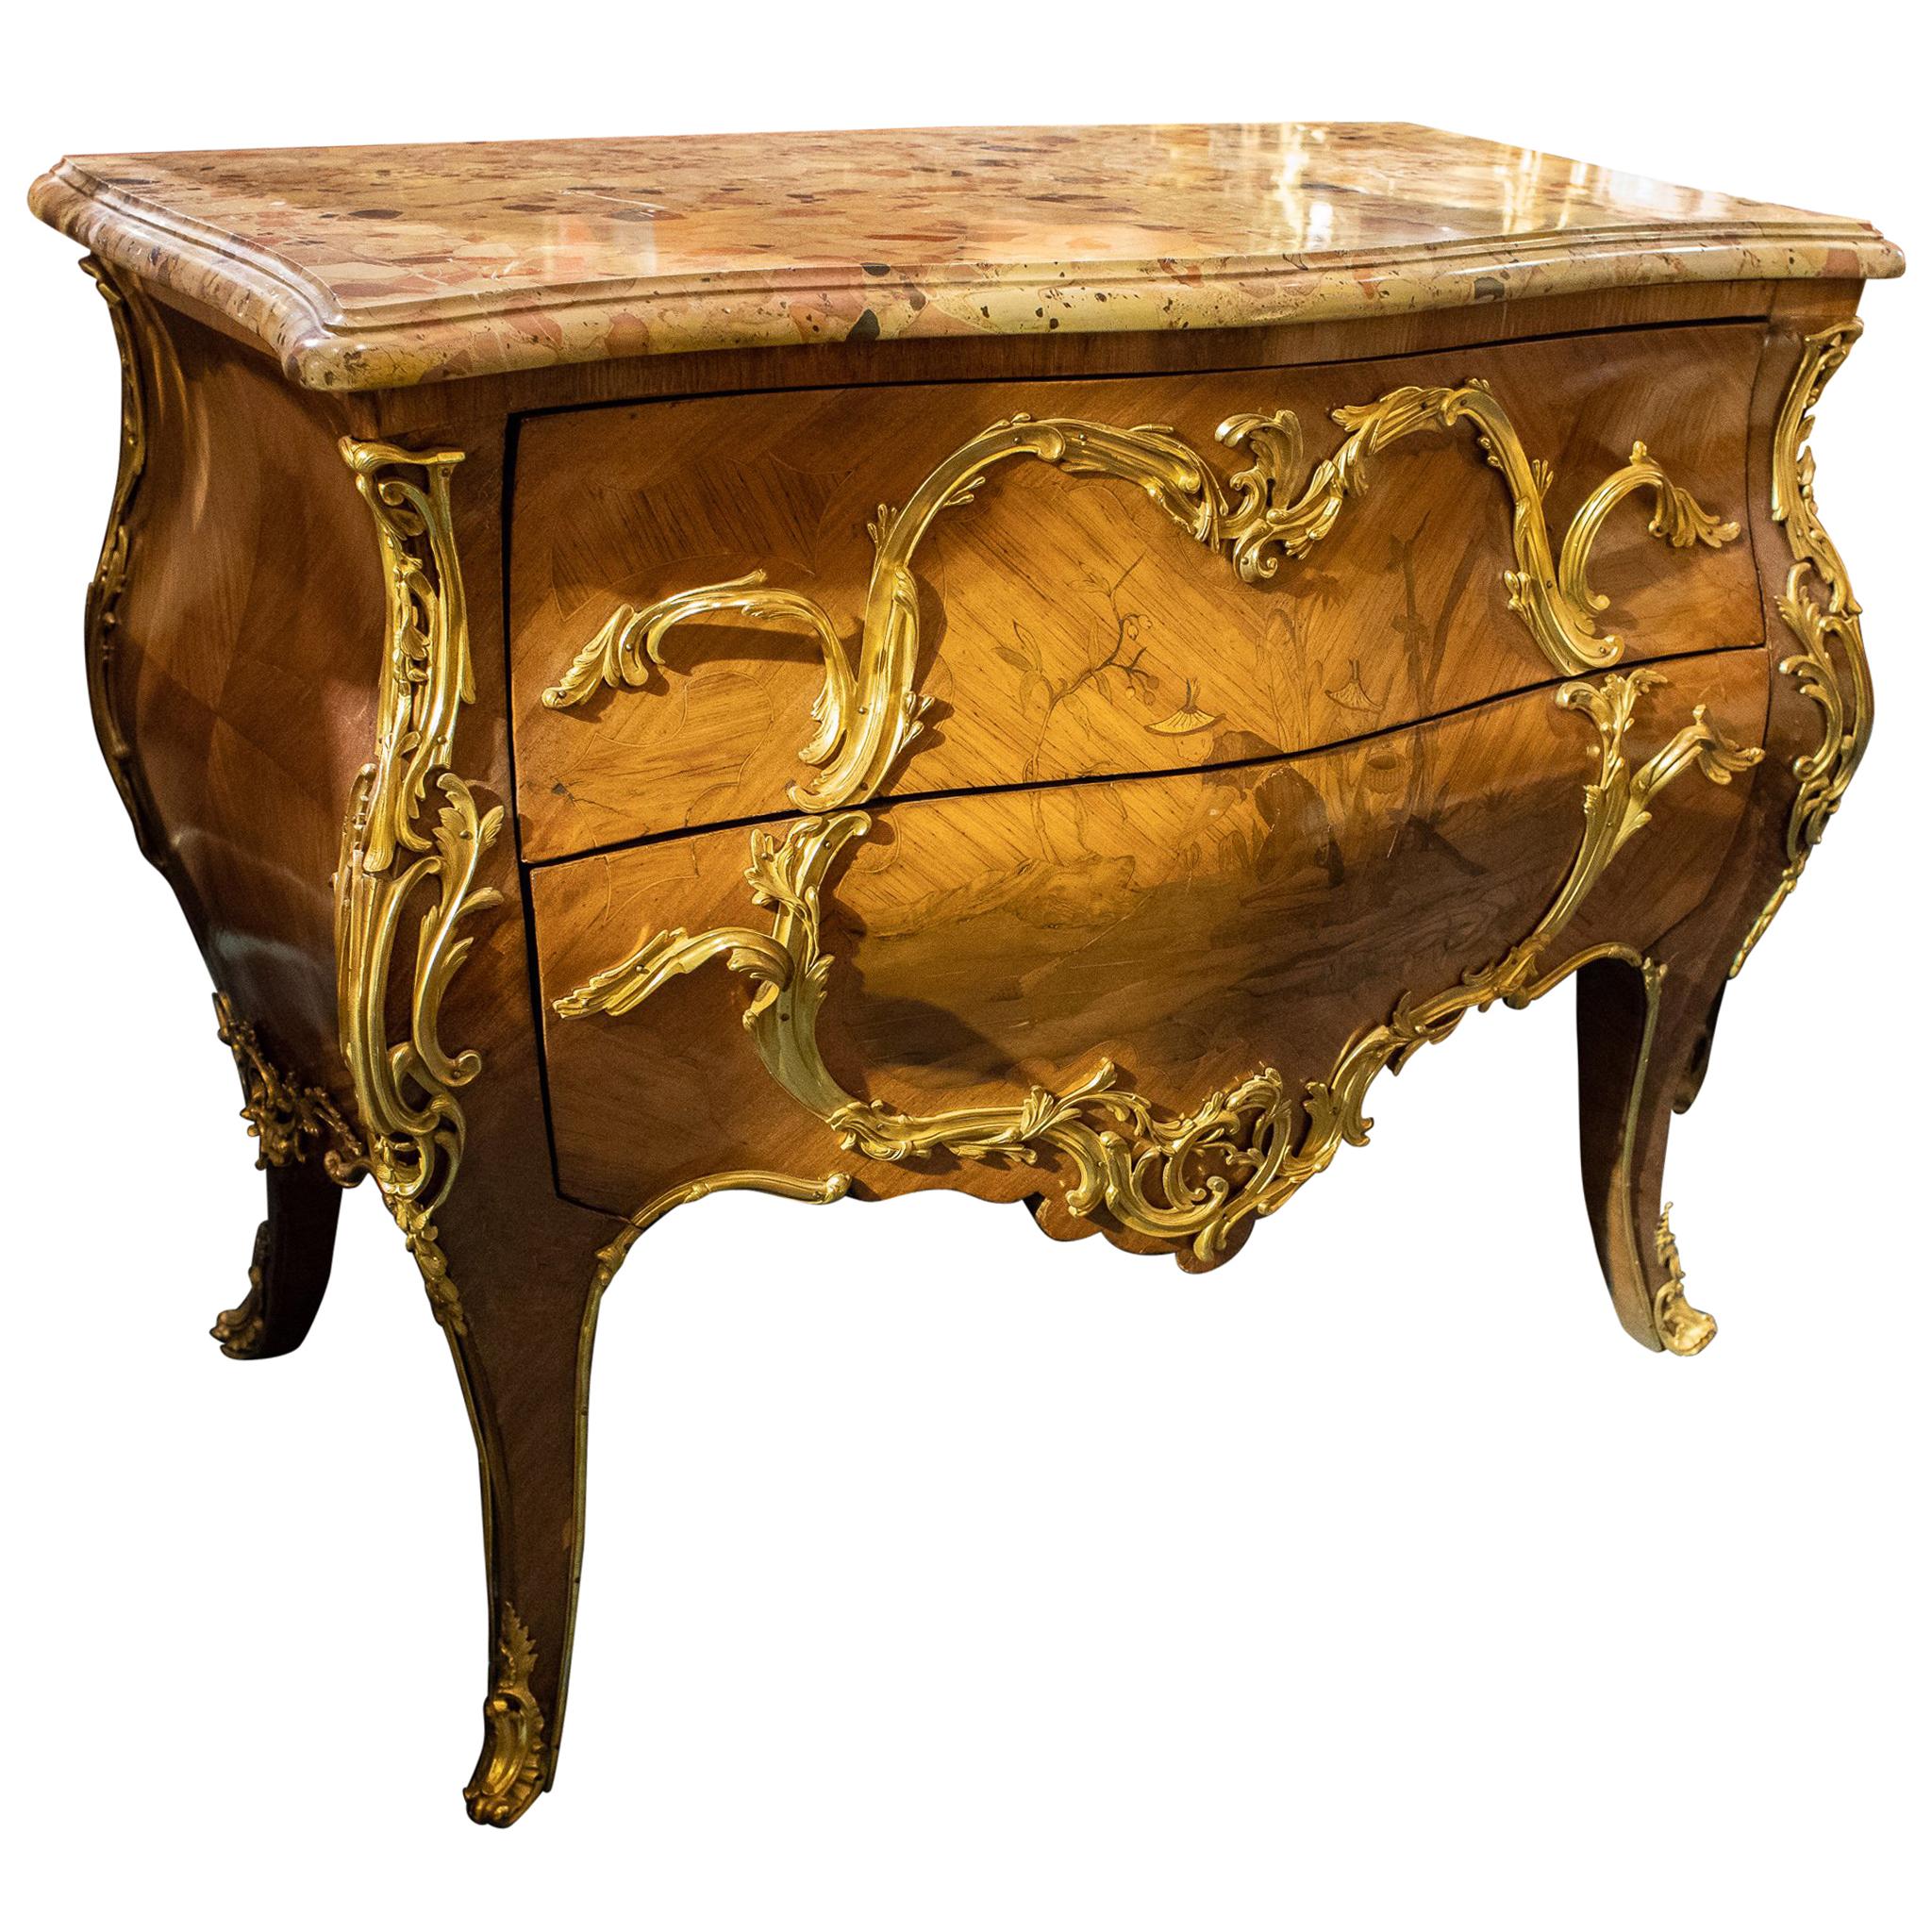 French Ormolu-Mounted Louis XV Style Chinoiserie Motif Marble-Top Commode